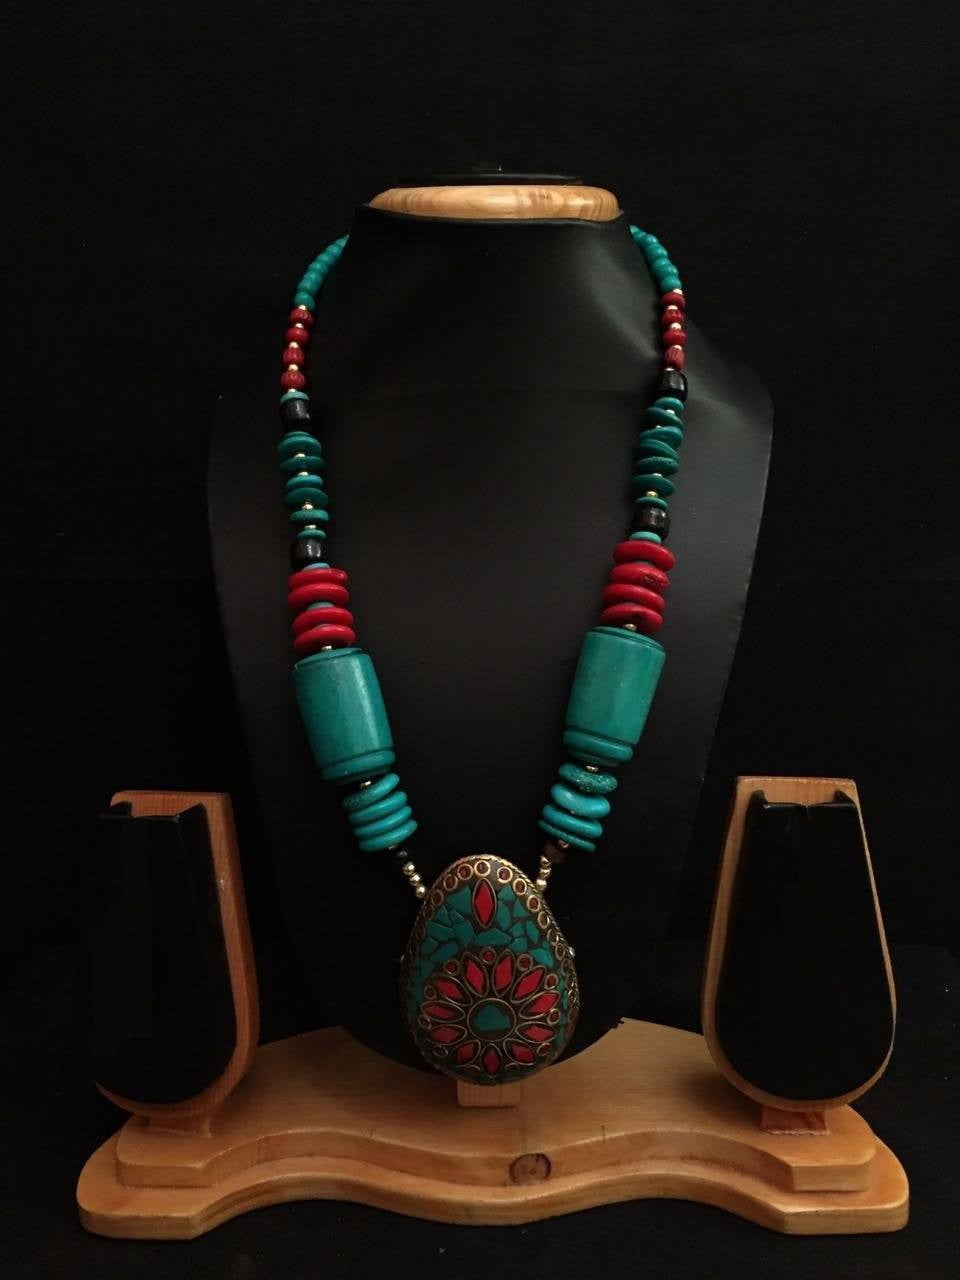 Handmade Beautiful Nepalian Beads Coral Stones Necklace with  German Silver Pendant Decorated with Coral Turquoise Stones